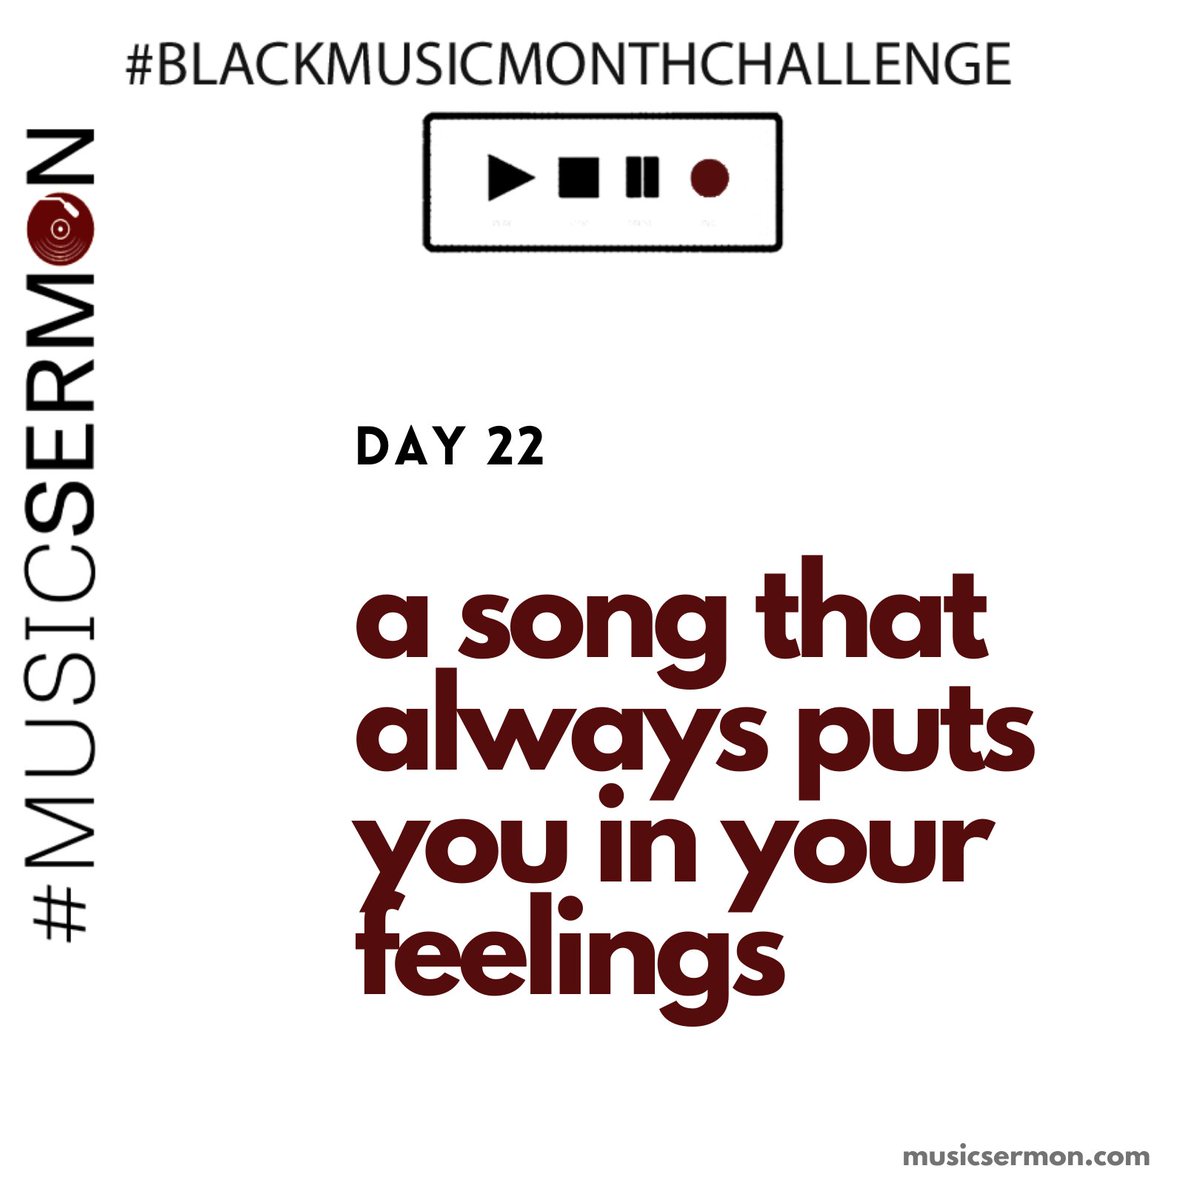 *Runs over to  #BlackMusicMonthChallenge* Sorry guys, I just realized I didn't post today's prompt!Which is probably for the best, because I don't want y'all trapped in a glass box of emotions for the whole day. For Day 22, share a song that always puts you in your feelings.